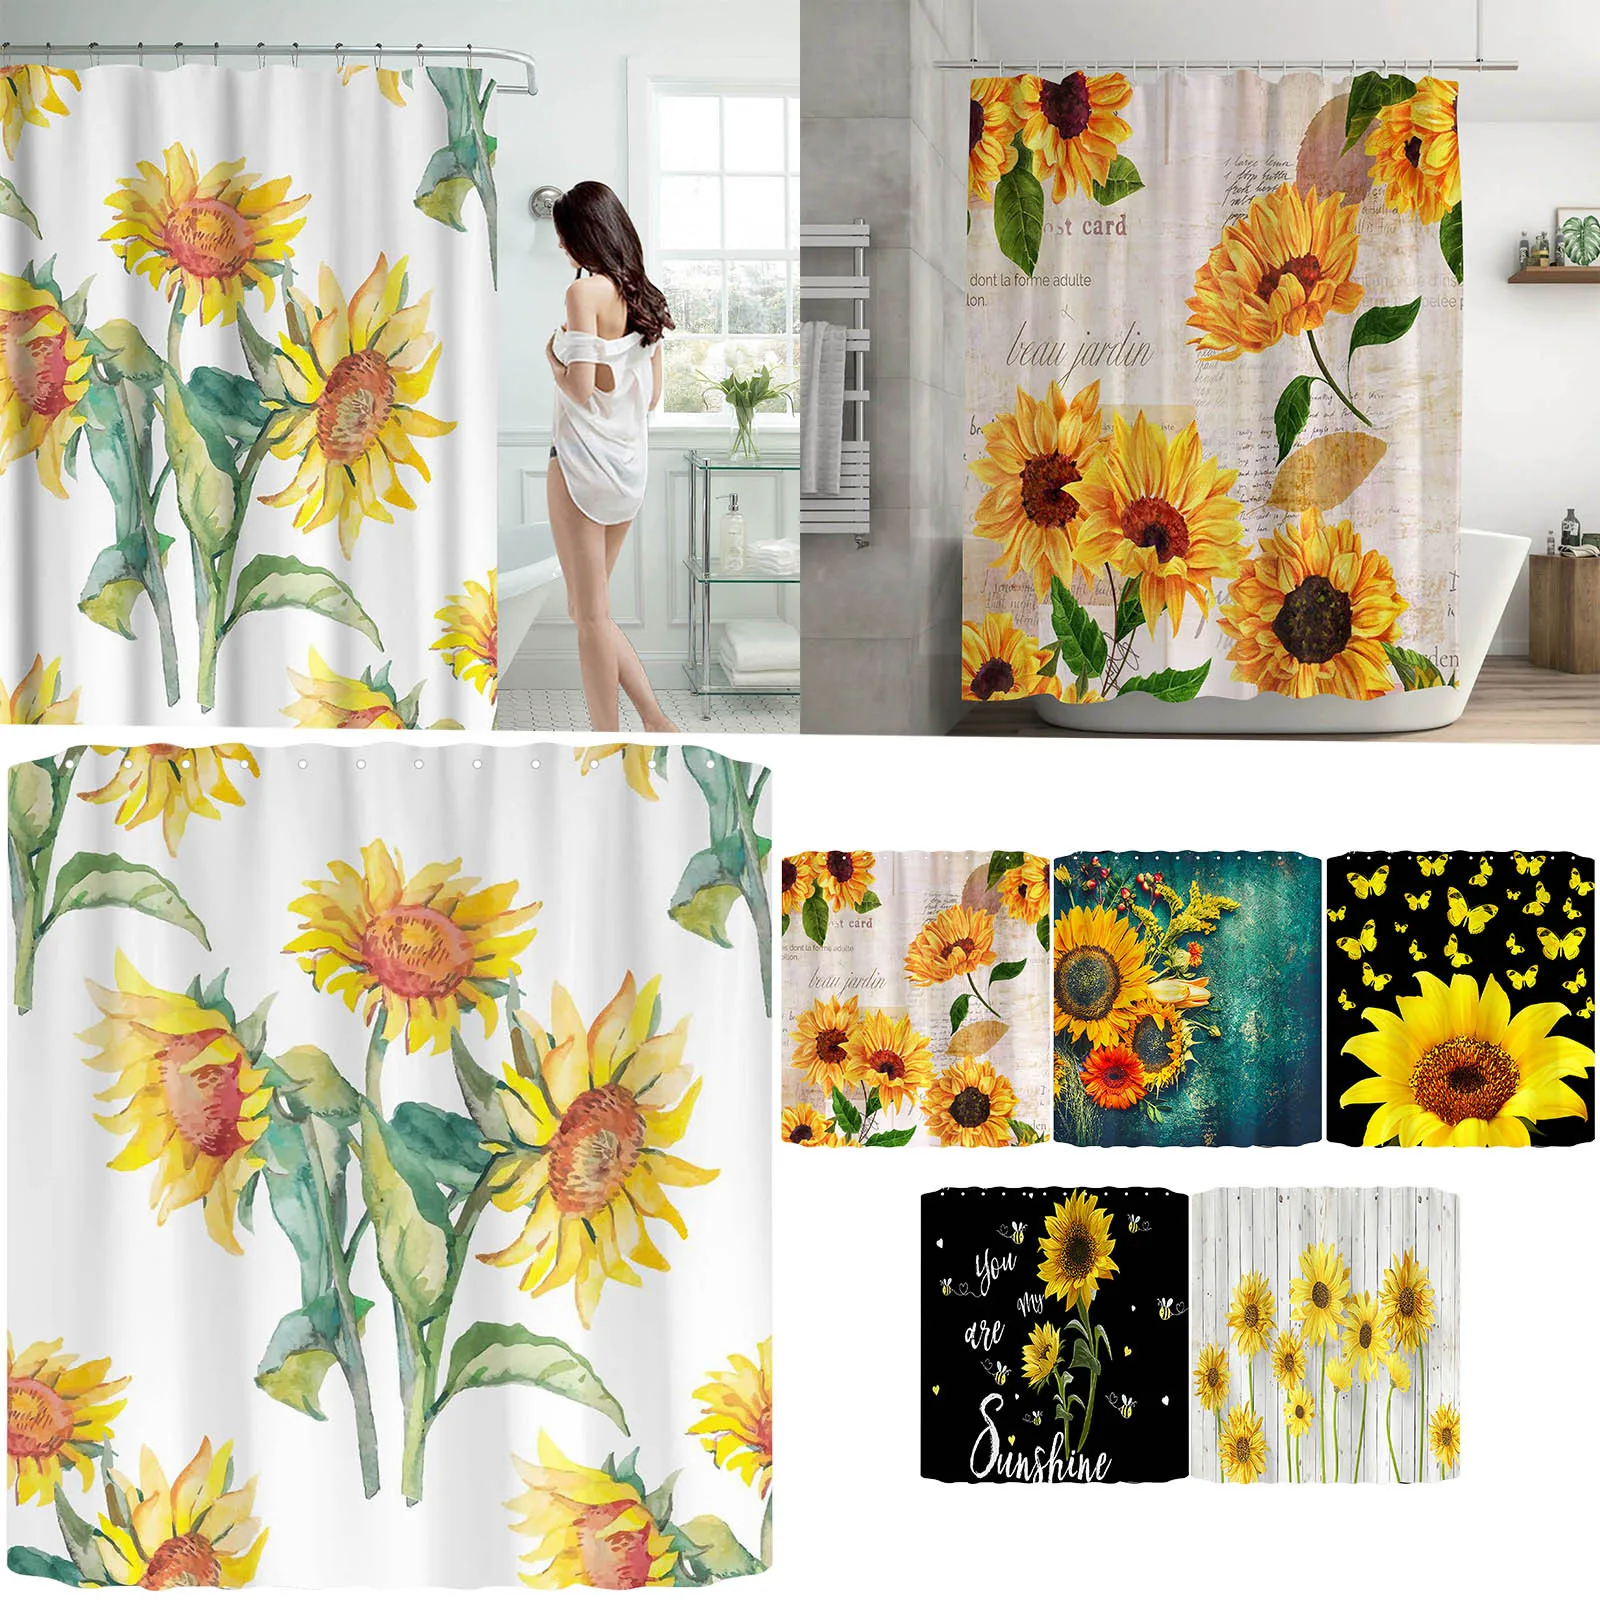 

Shower Curtain 70x70 Linen Shower Curtain Extra Long Basement Shower Curtain Hotel Shower Curtain with Detachable Liner Yellow